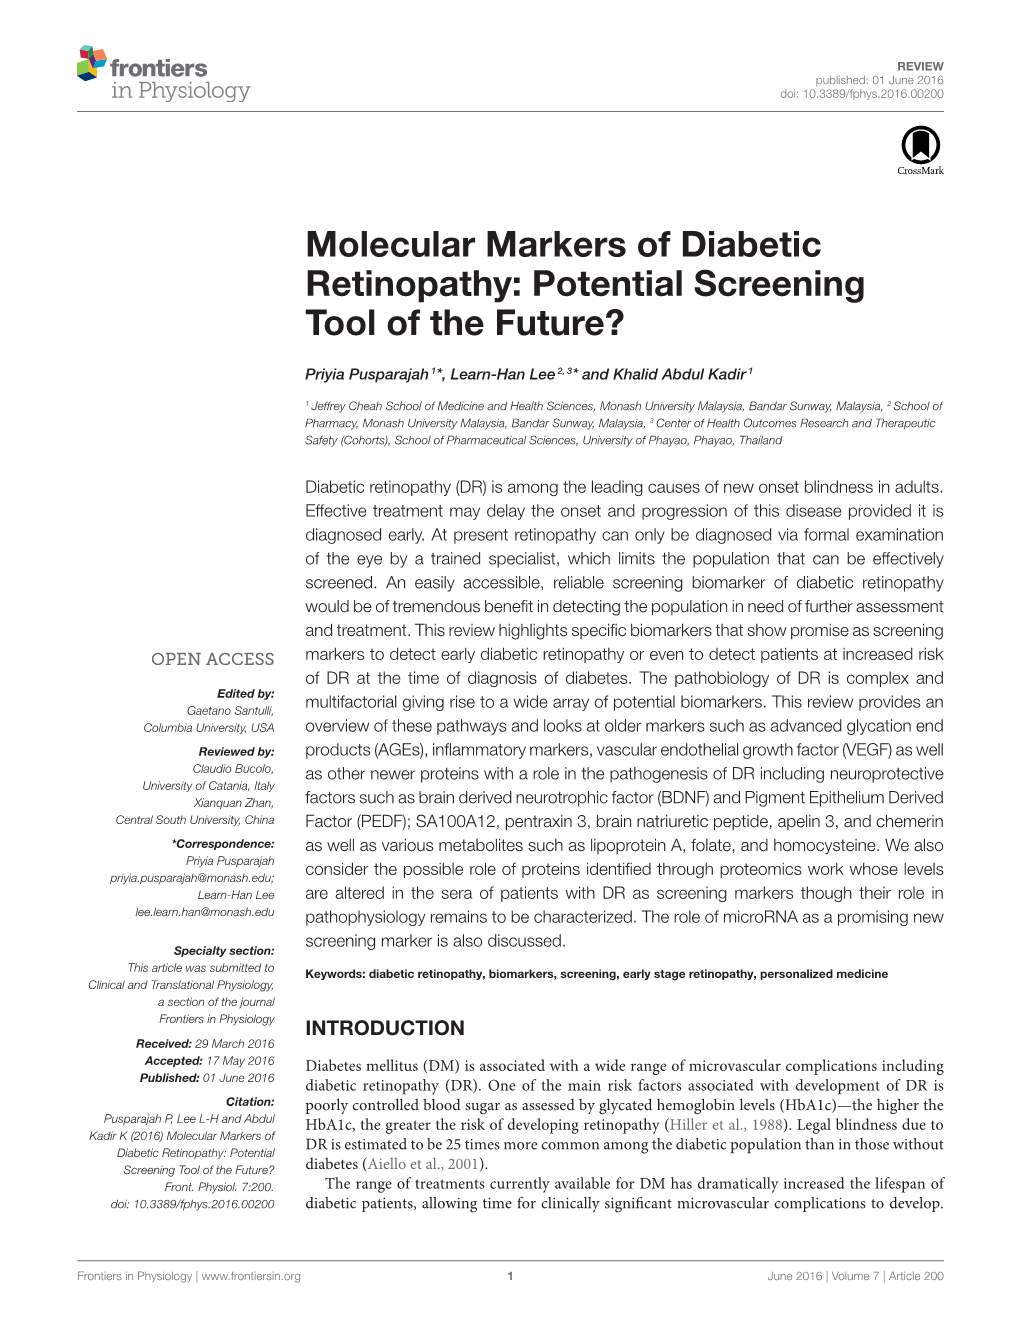 Molecular Markers of Diabetic Retinopathy: Potential Screening Tool of the Future?